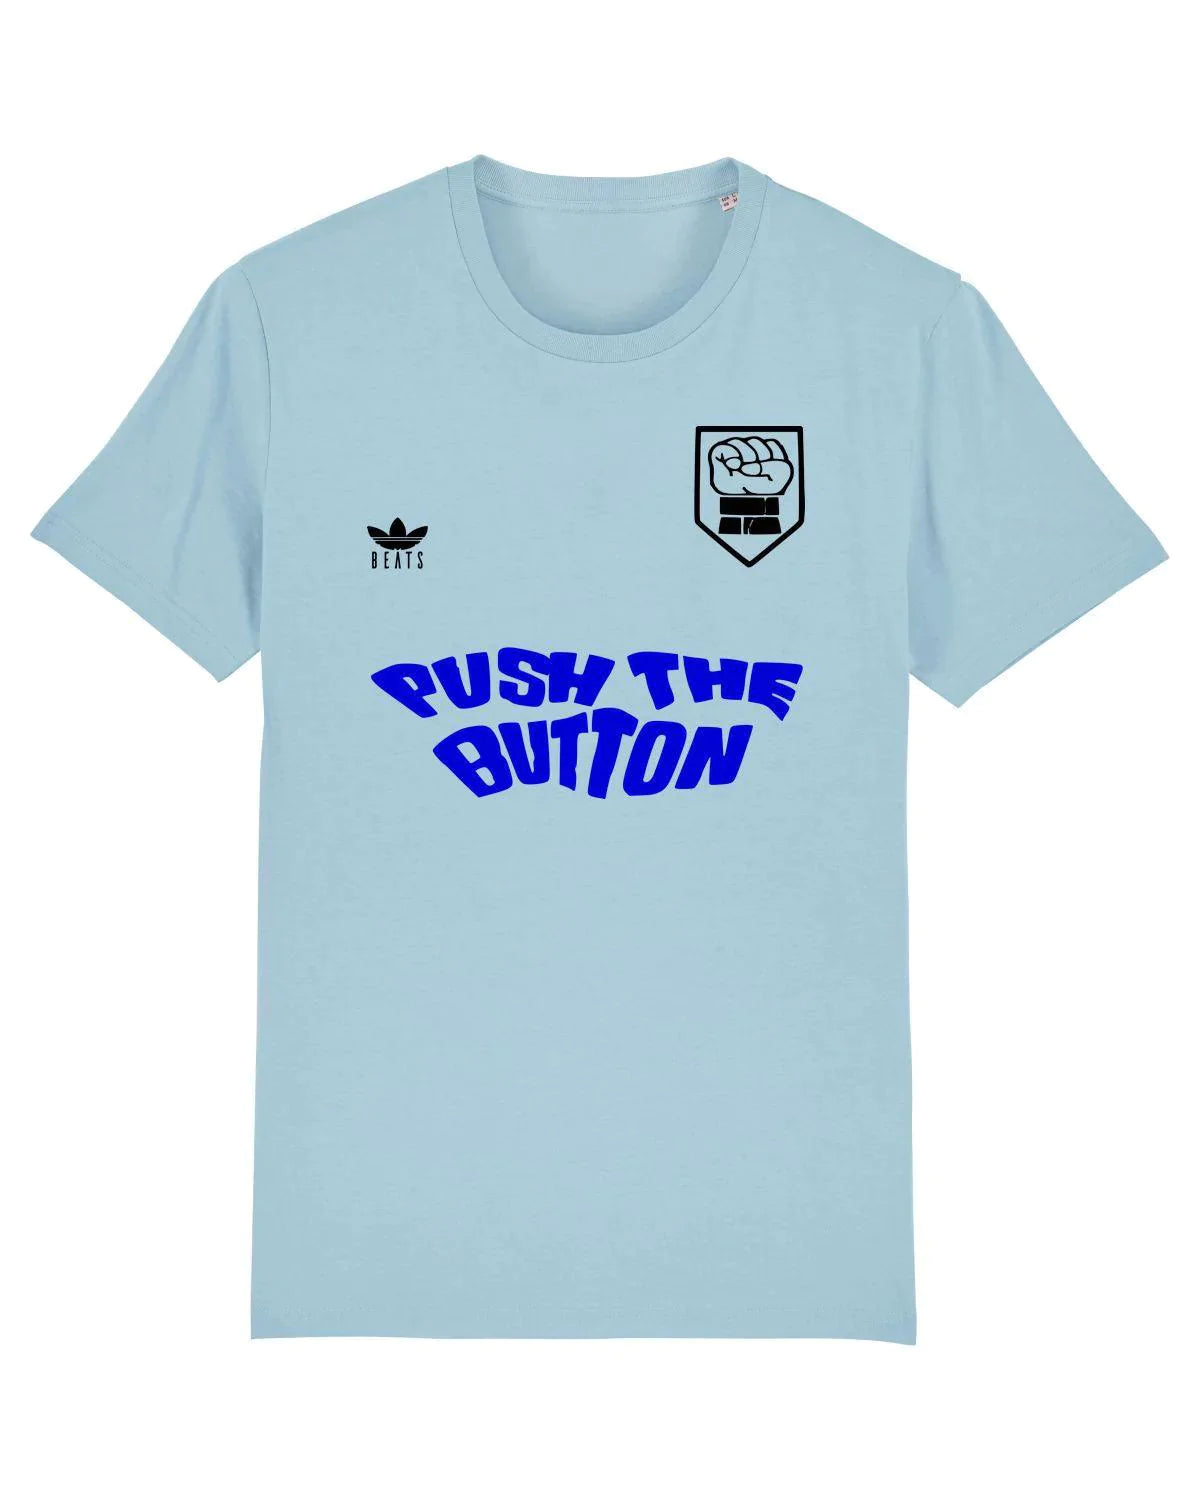 PUSH THE BUTTON: T-Shirt Inspired by The Chemical Brothers & Football - SOUND IS COLOUR